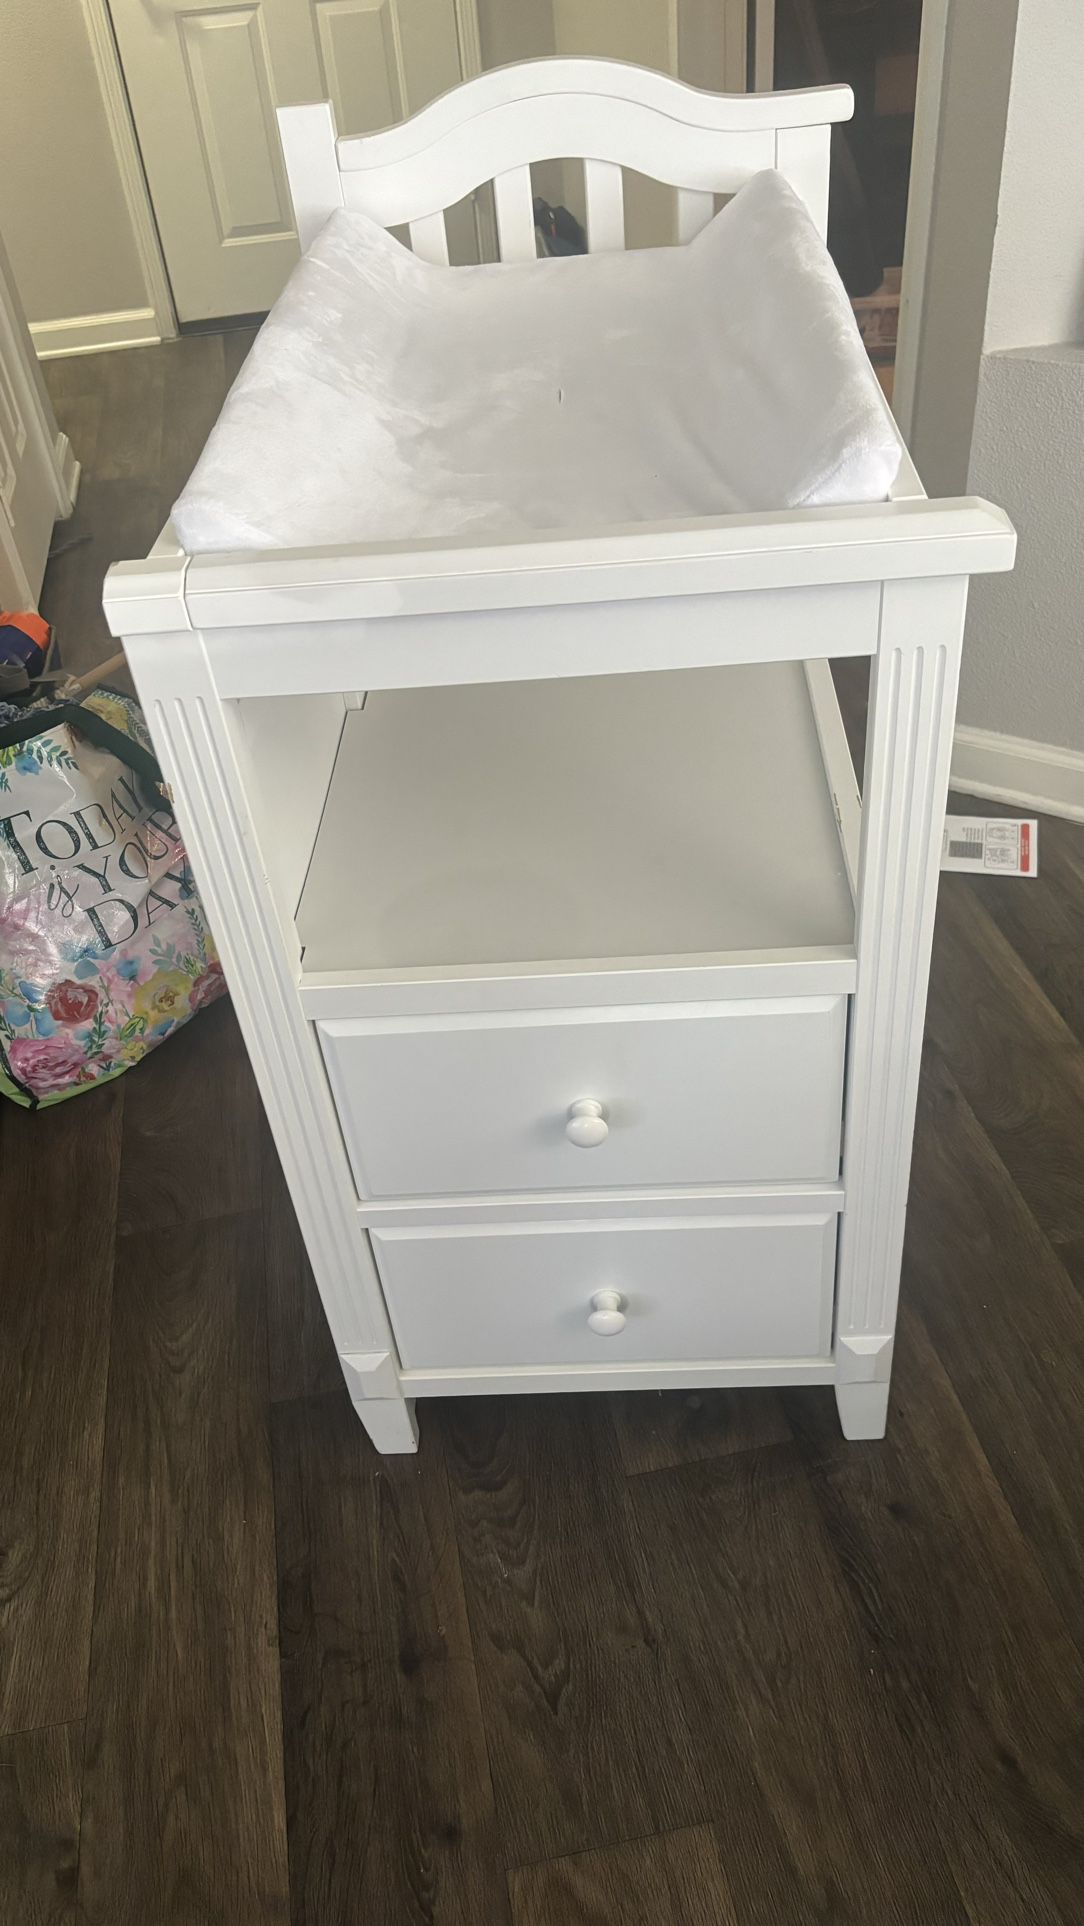 Changing Table FREE